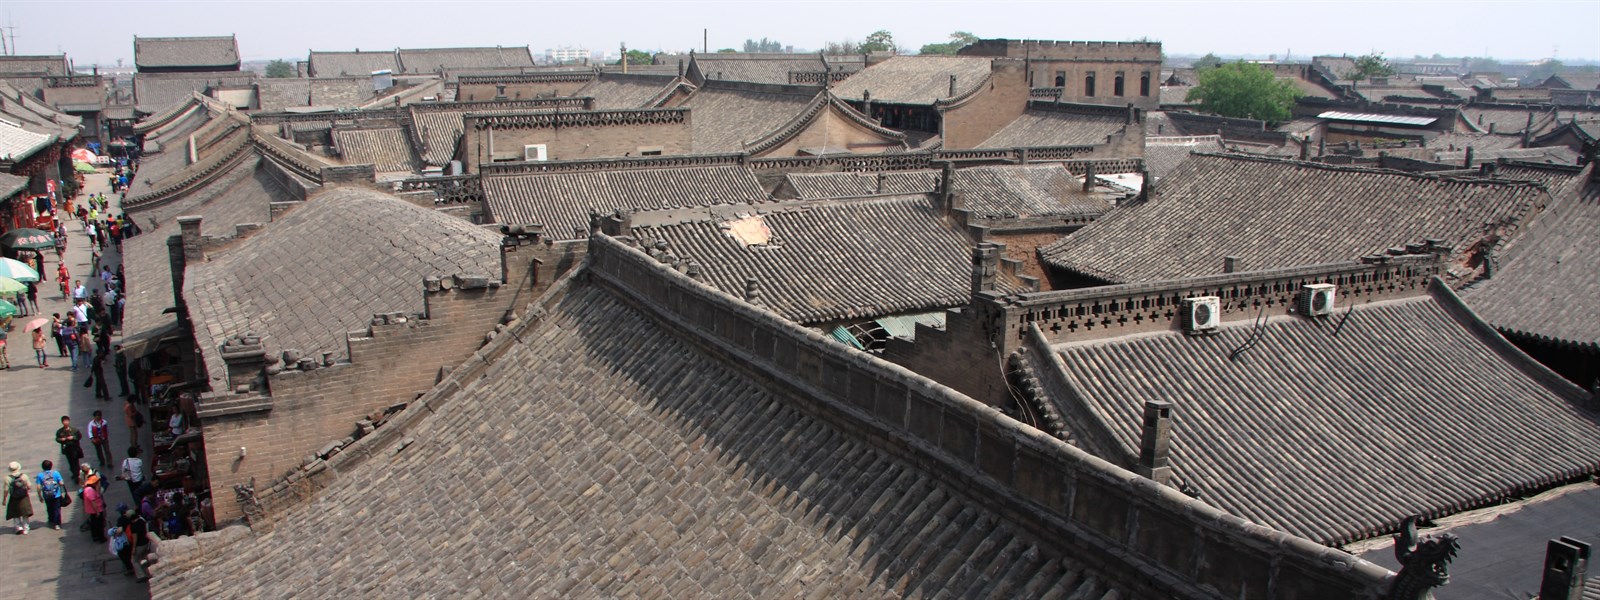 You are currently viewing Rundgang durch die Altstadt von Pingyao